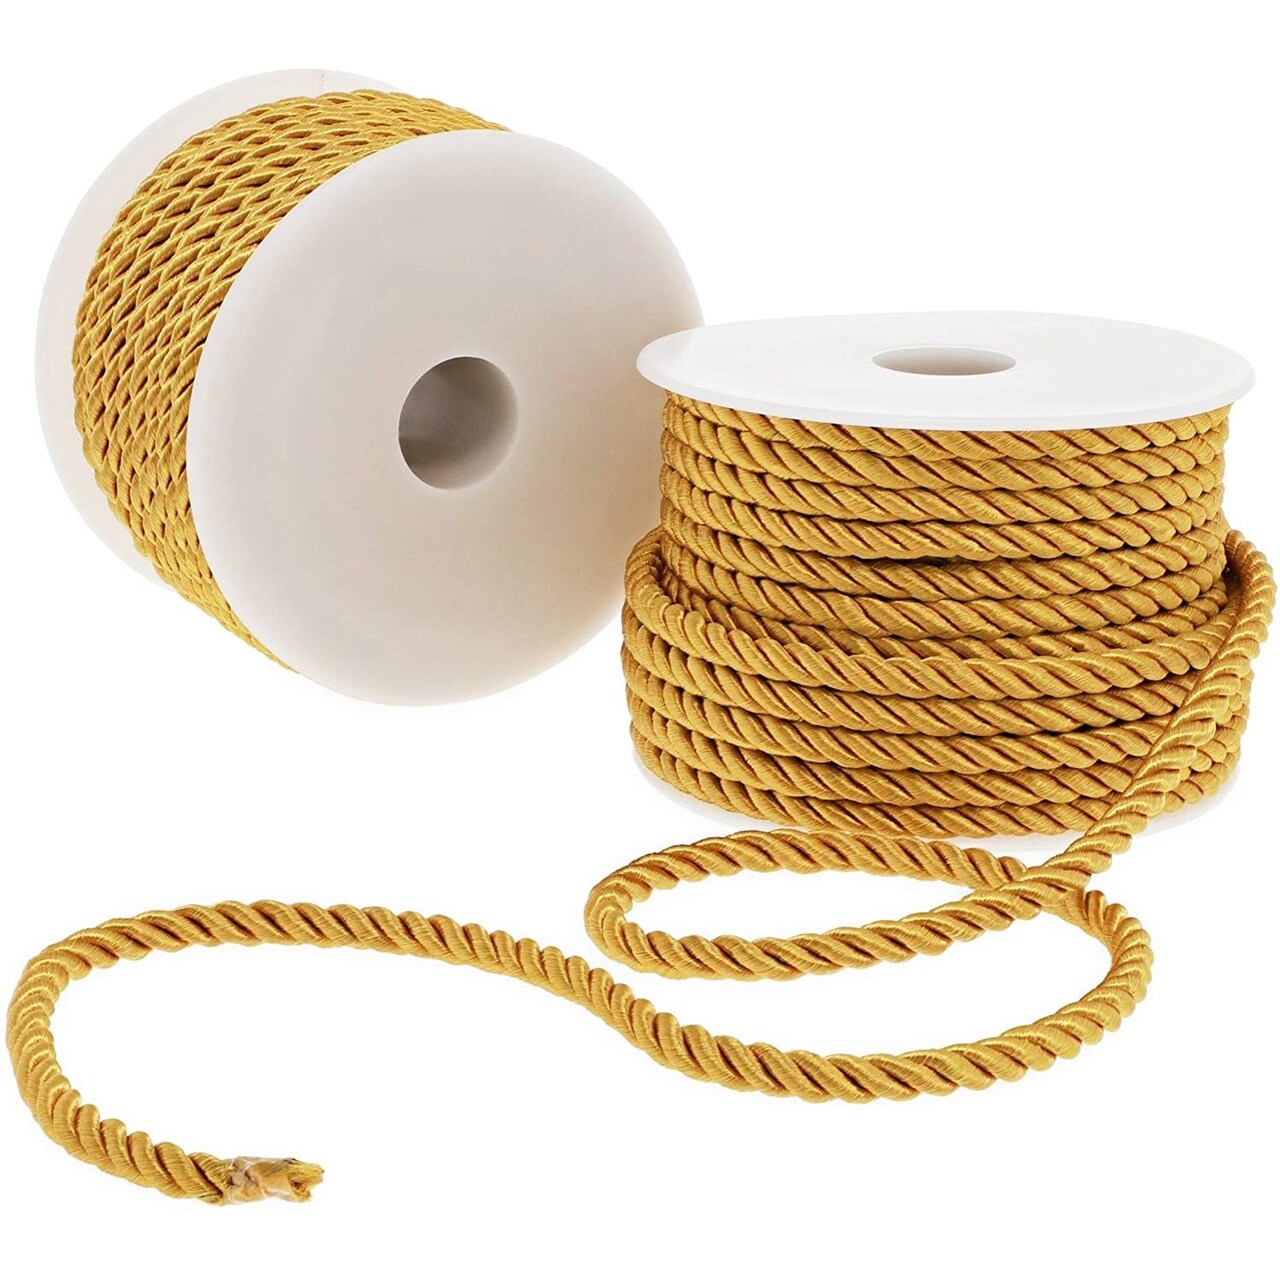 Twisted Gold Cord for Crafts, Sewing, Upholstery (36 Yards, 2 Rolls)